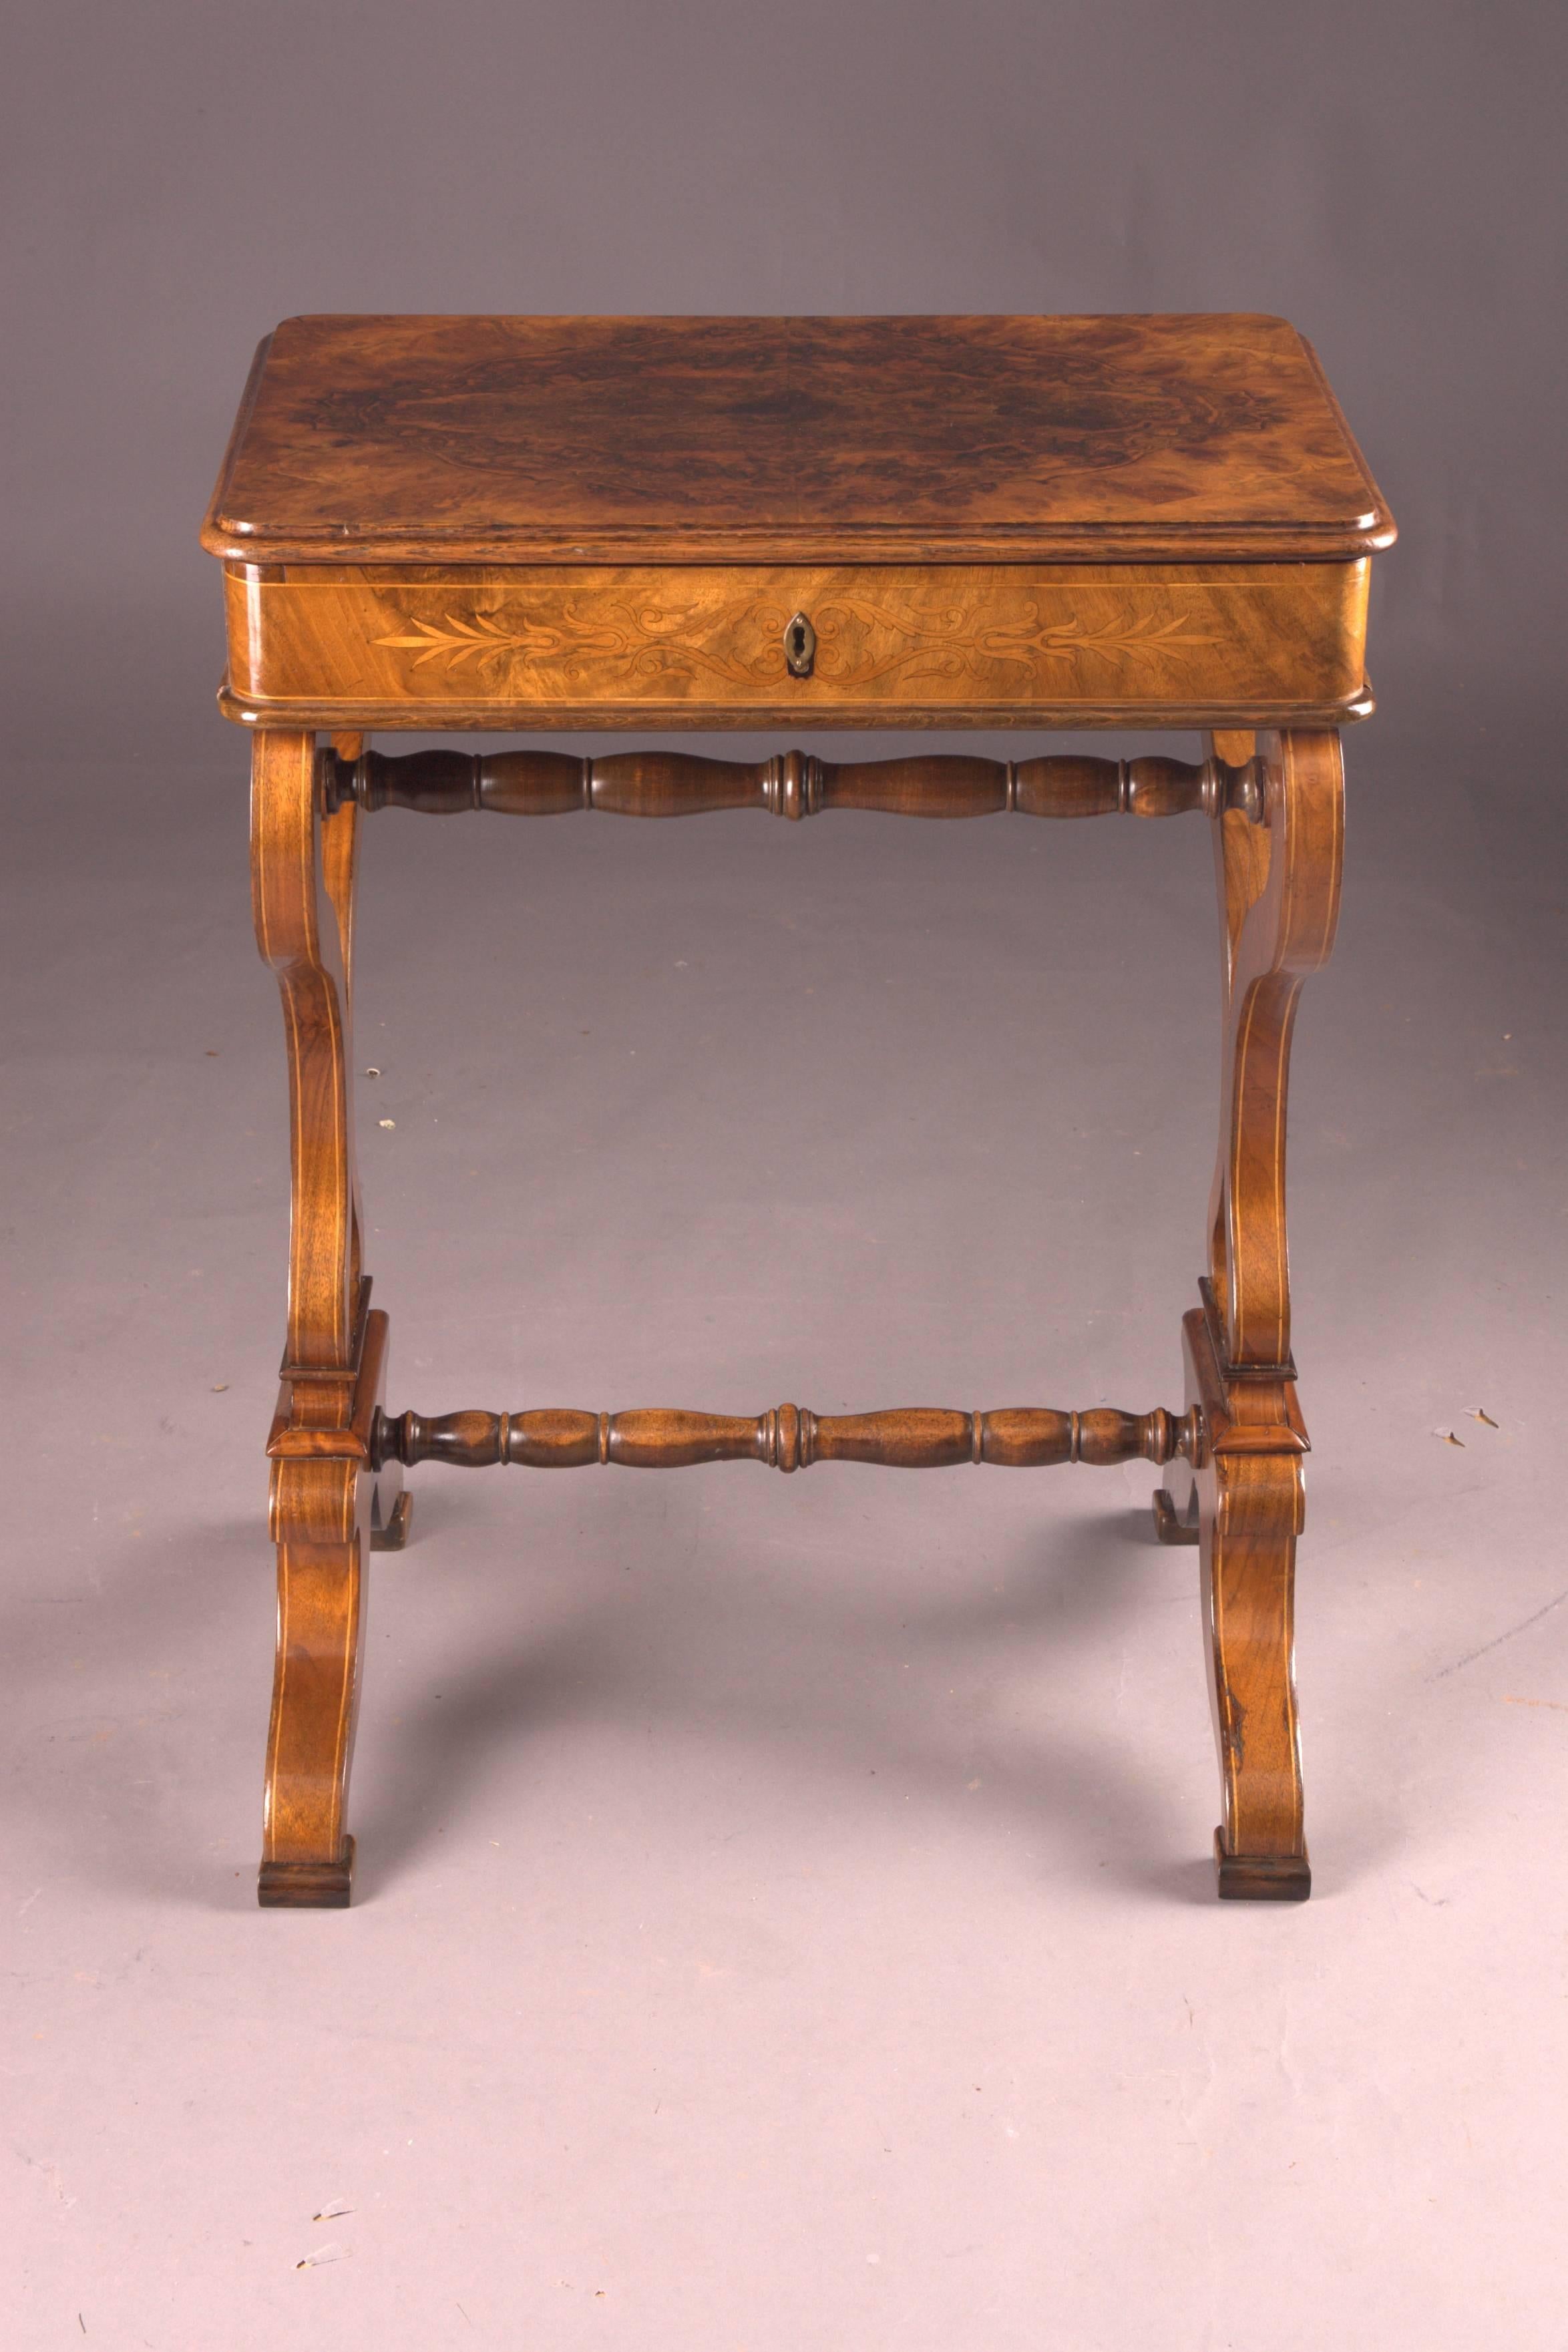 Walnut root on solid pinewood. Rectangular body with slightly overlapping hinge lid. Drawer inside with richly divided compartment. Stands on heart-shaped sides, which are connected in the middle with a turned column.

Root veneer with Classic